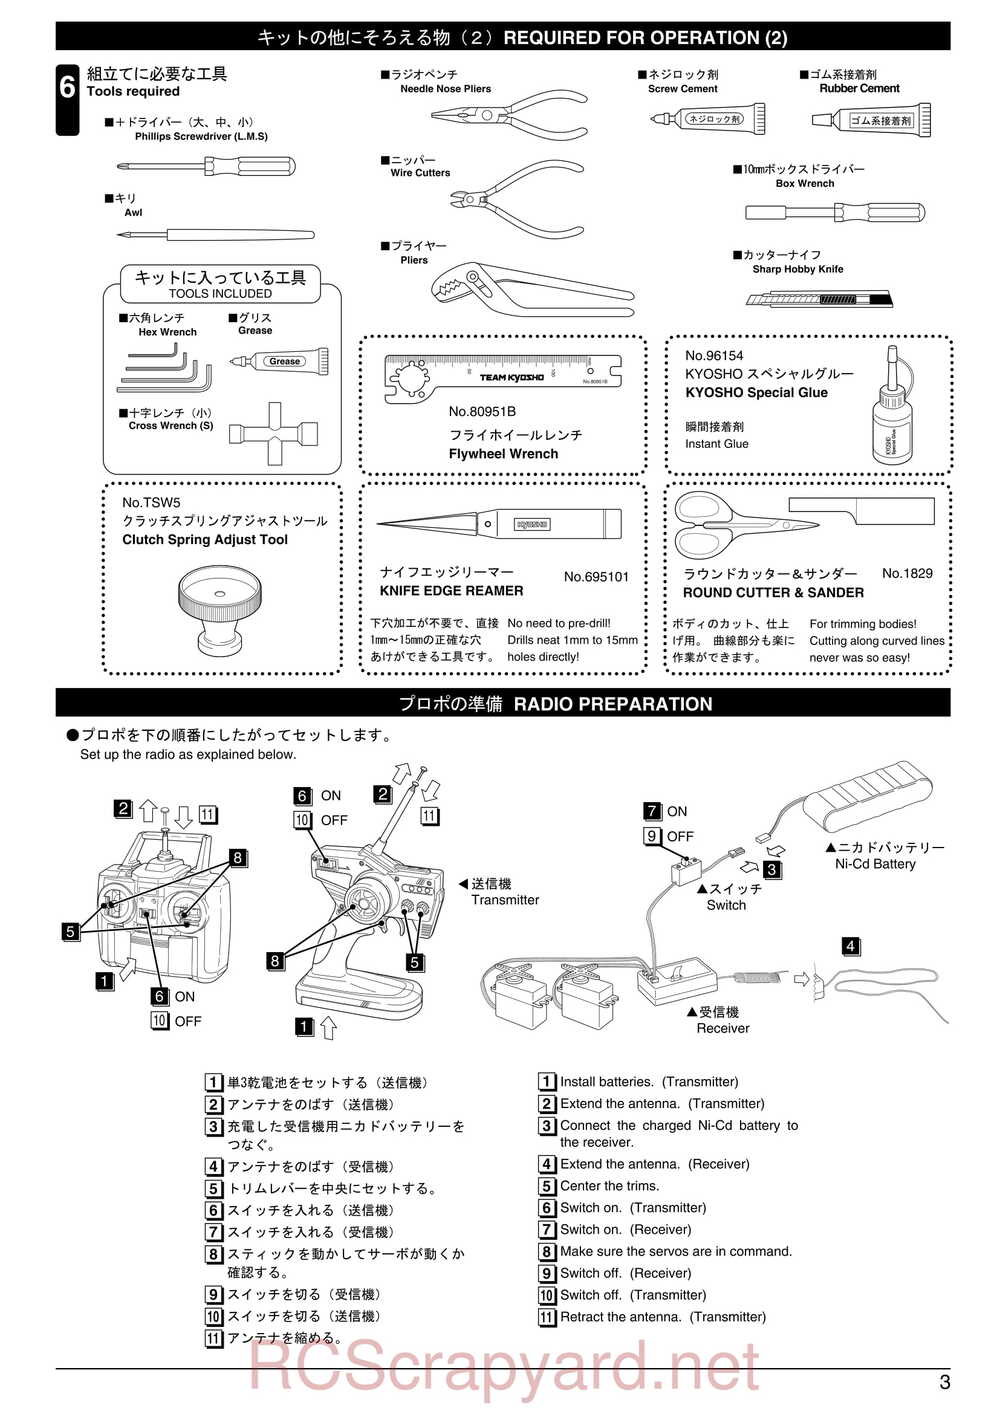 Kyosho - 31257 - V-One RRR Rubber - Manual - Page 03